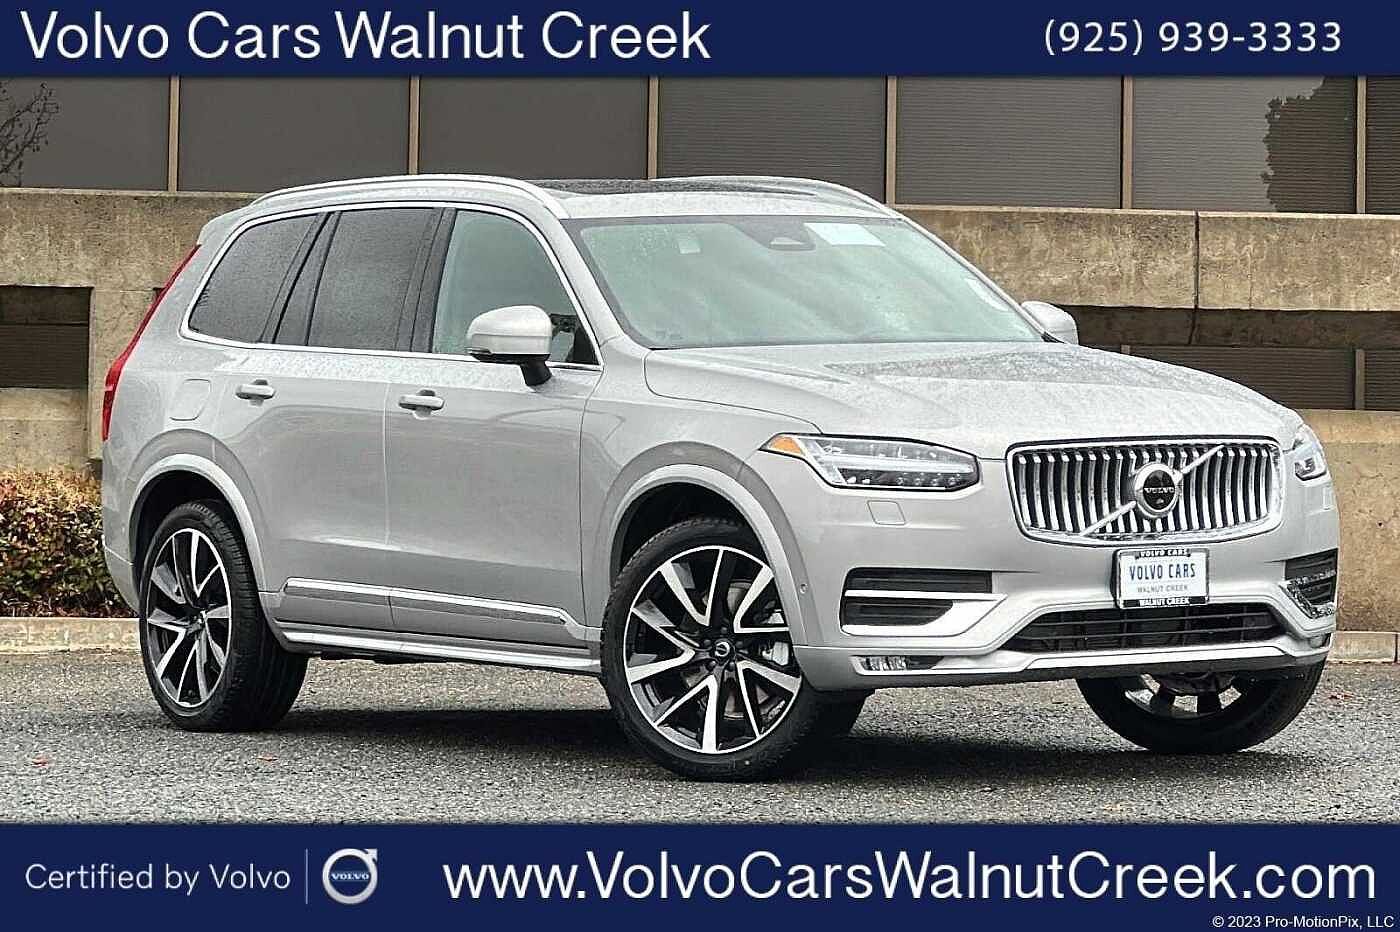 Pre-owned Volvo XC90 Cars for Sale on Certified by Volvo | Volvo